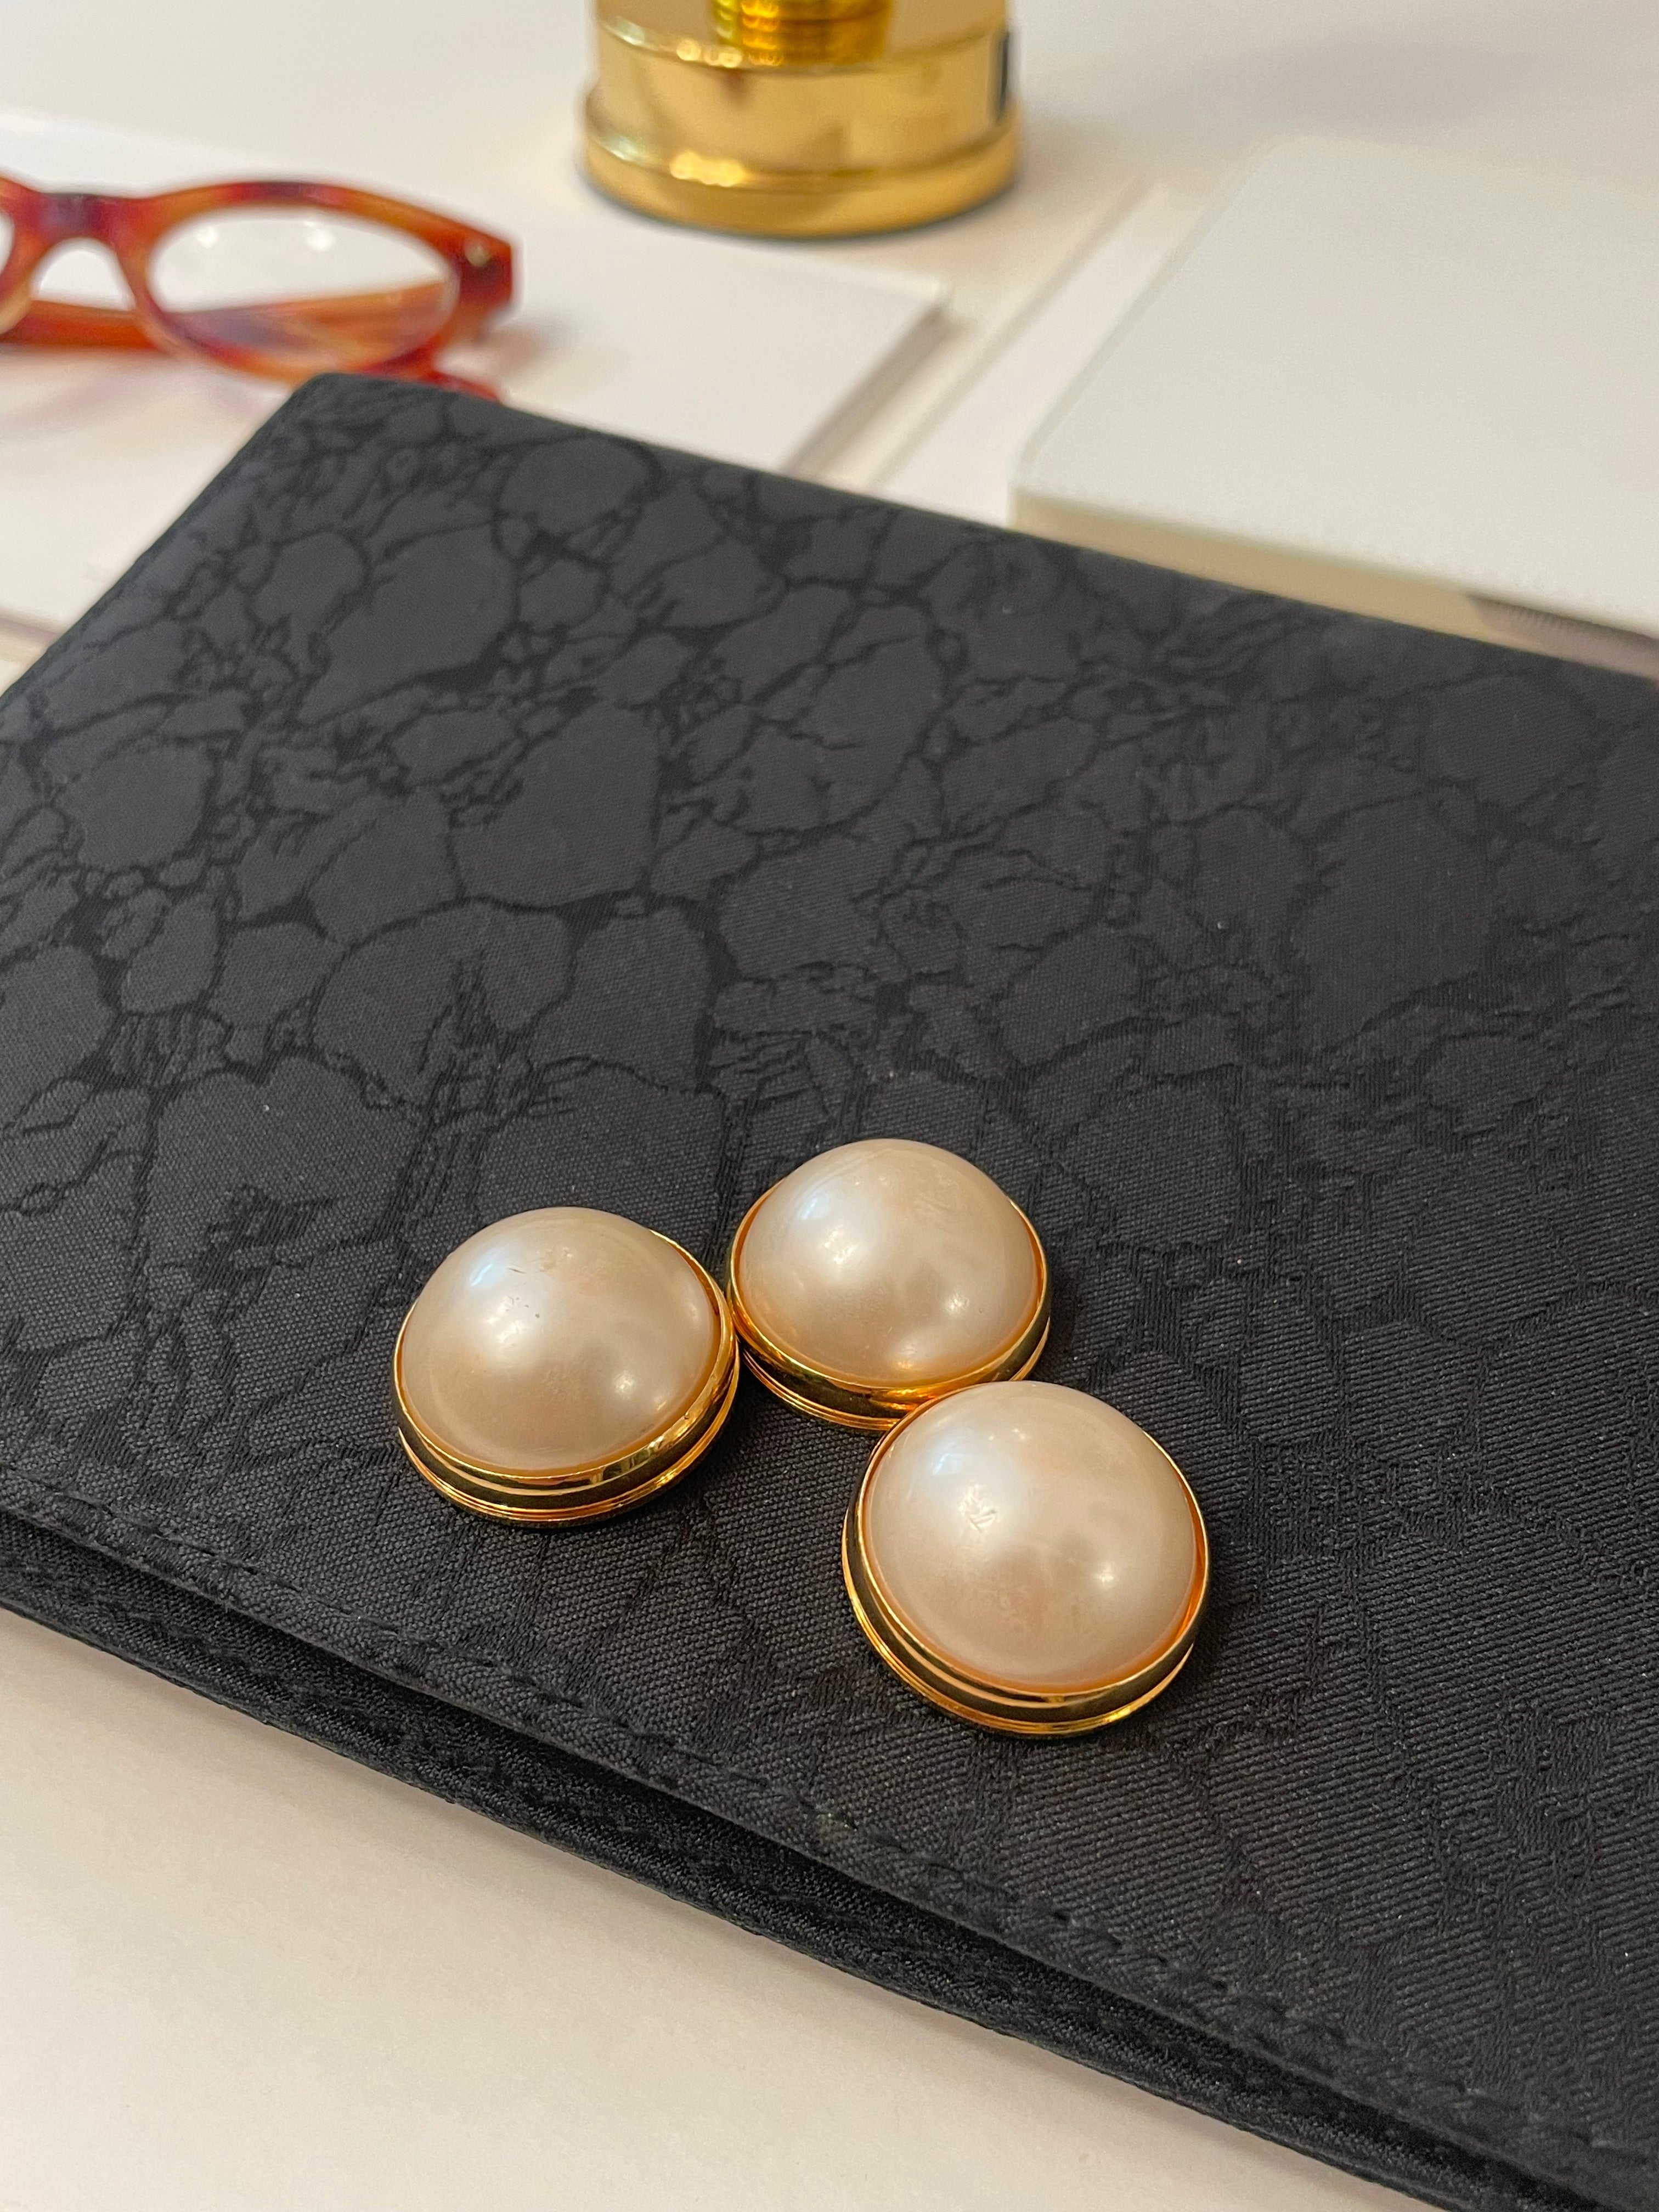 Isn't she charming delightful noir clutch bag, adorned with large pearls.... so elegant